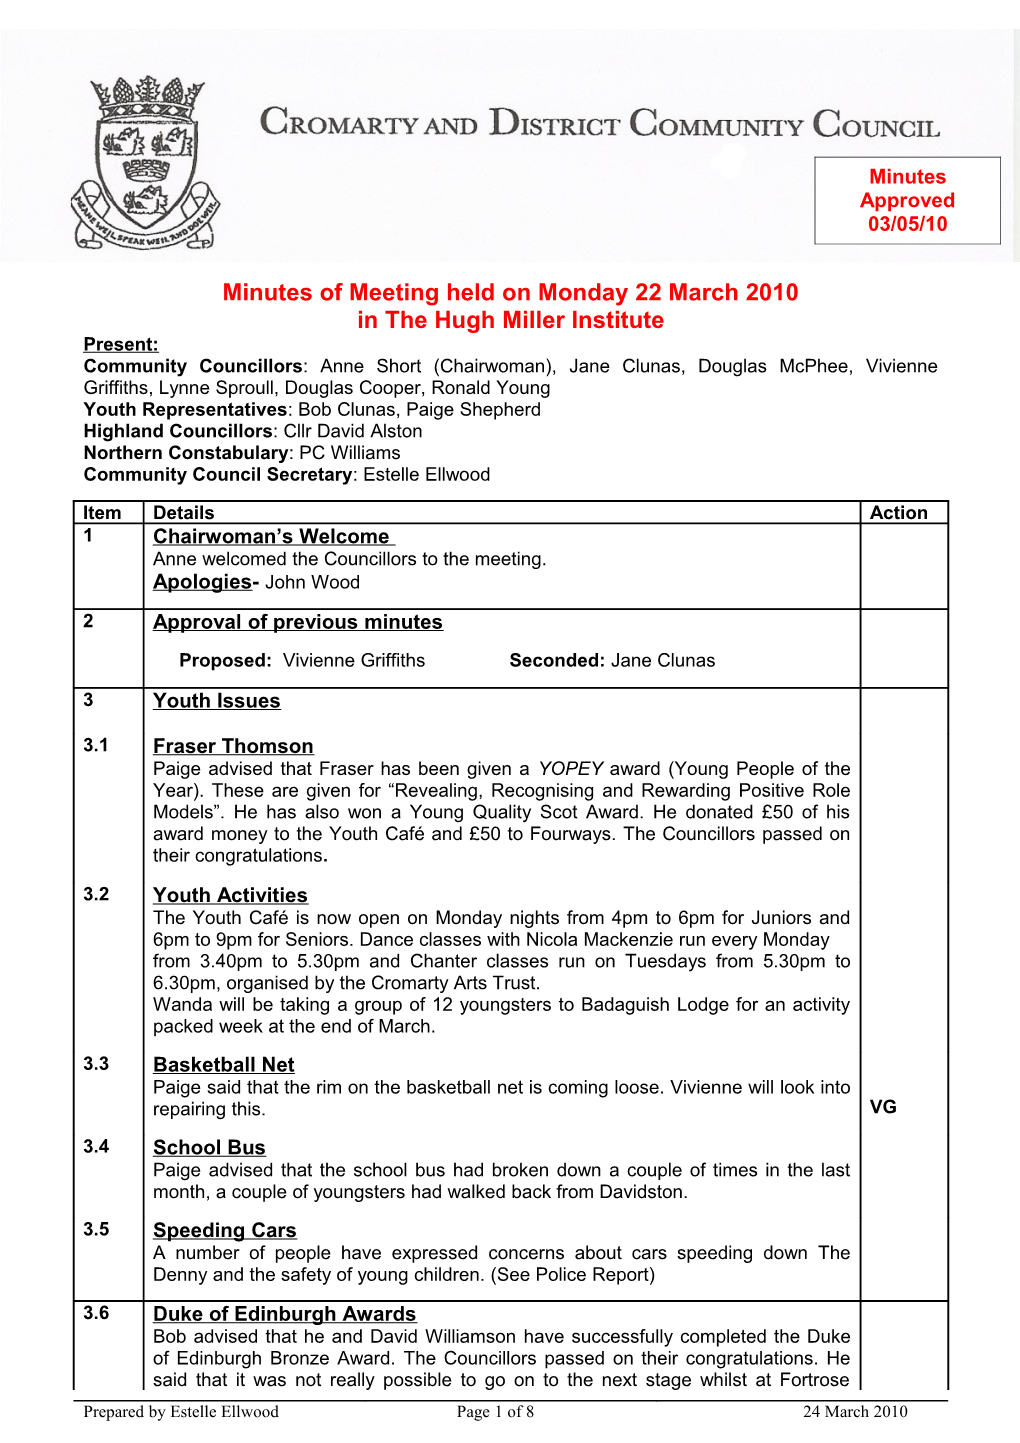 Minutes of Meeting Held on Monday 22 March 2010